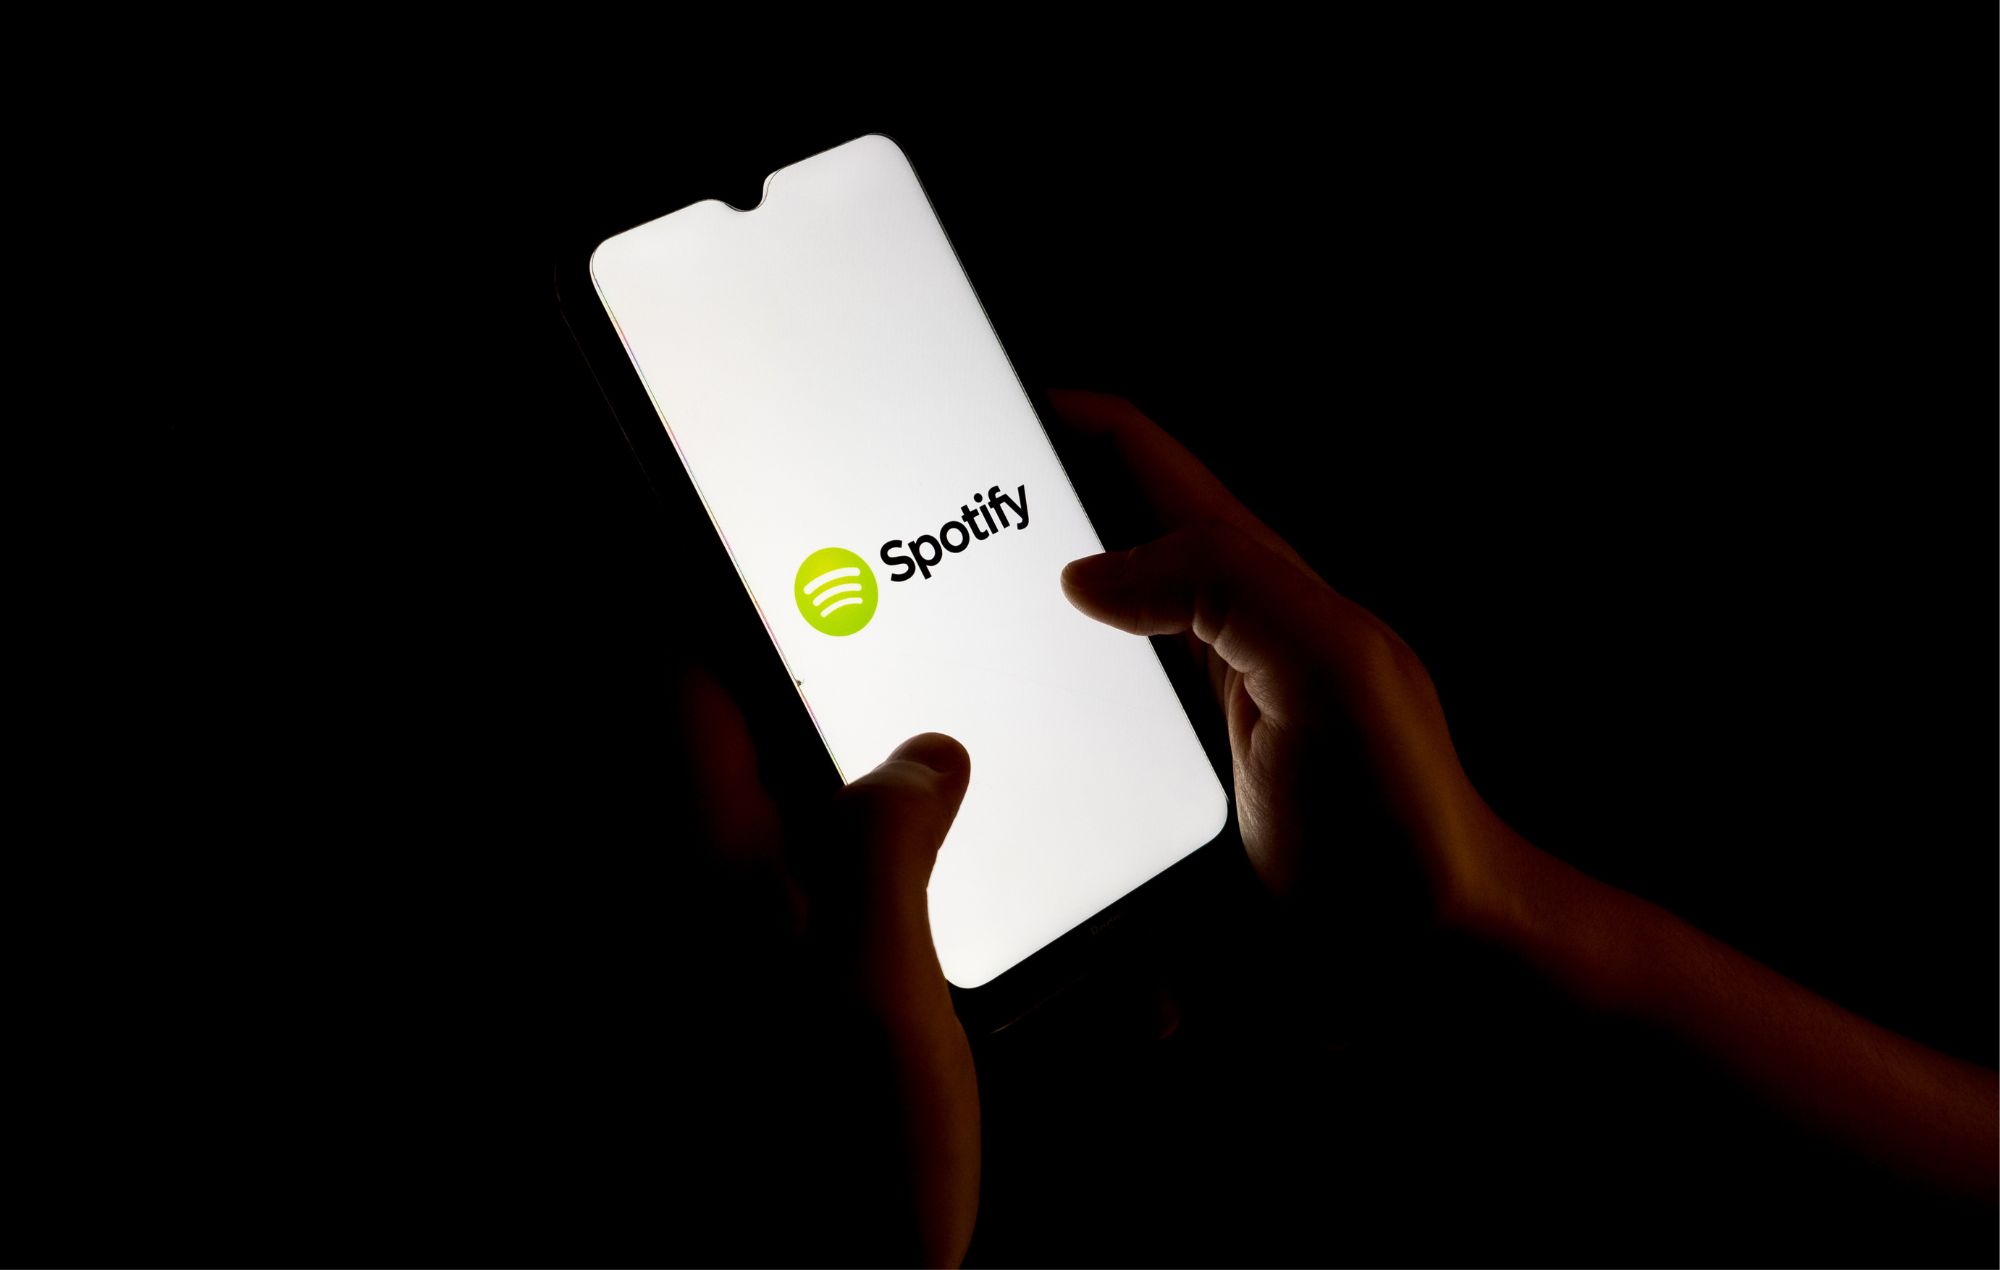 Spotify logo seen displayed on a smartphone screen stock image